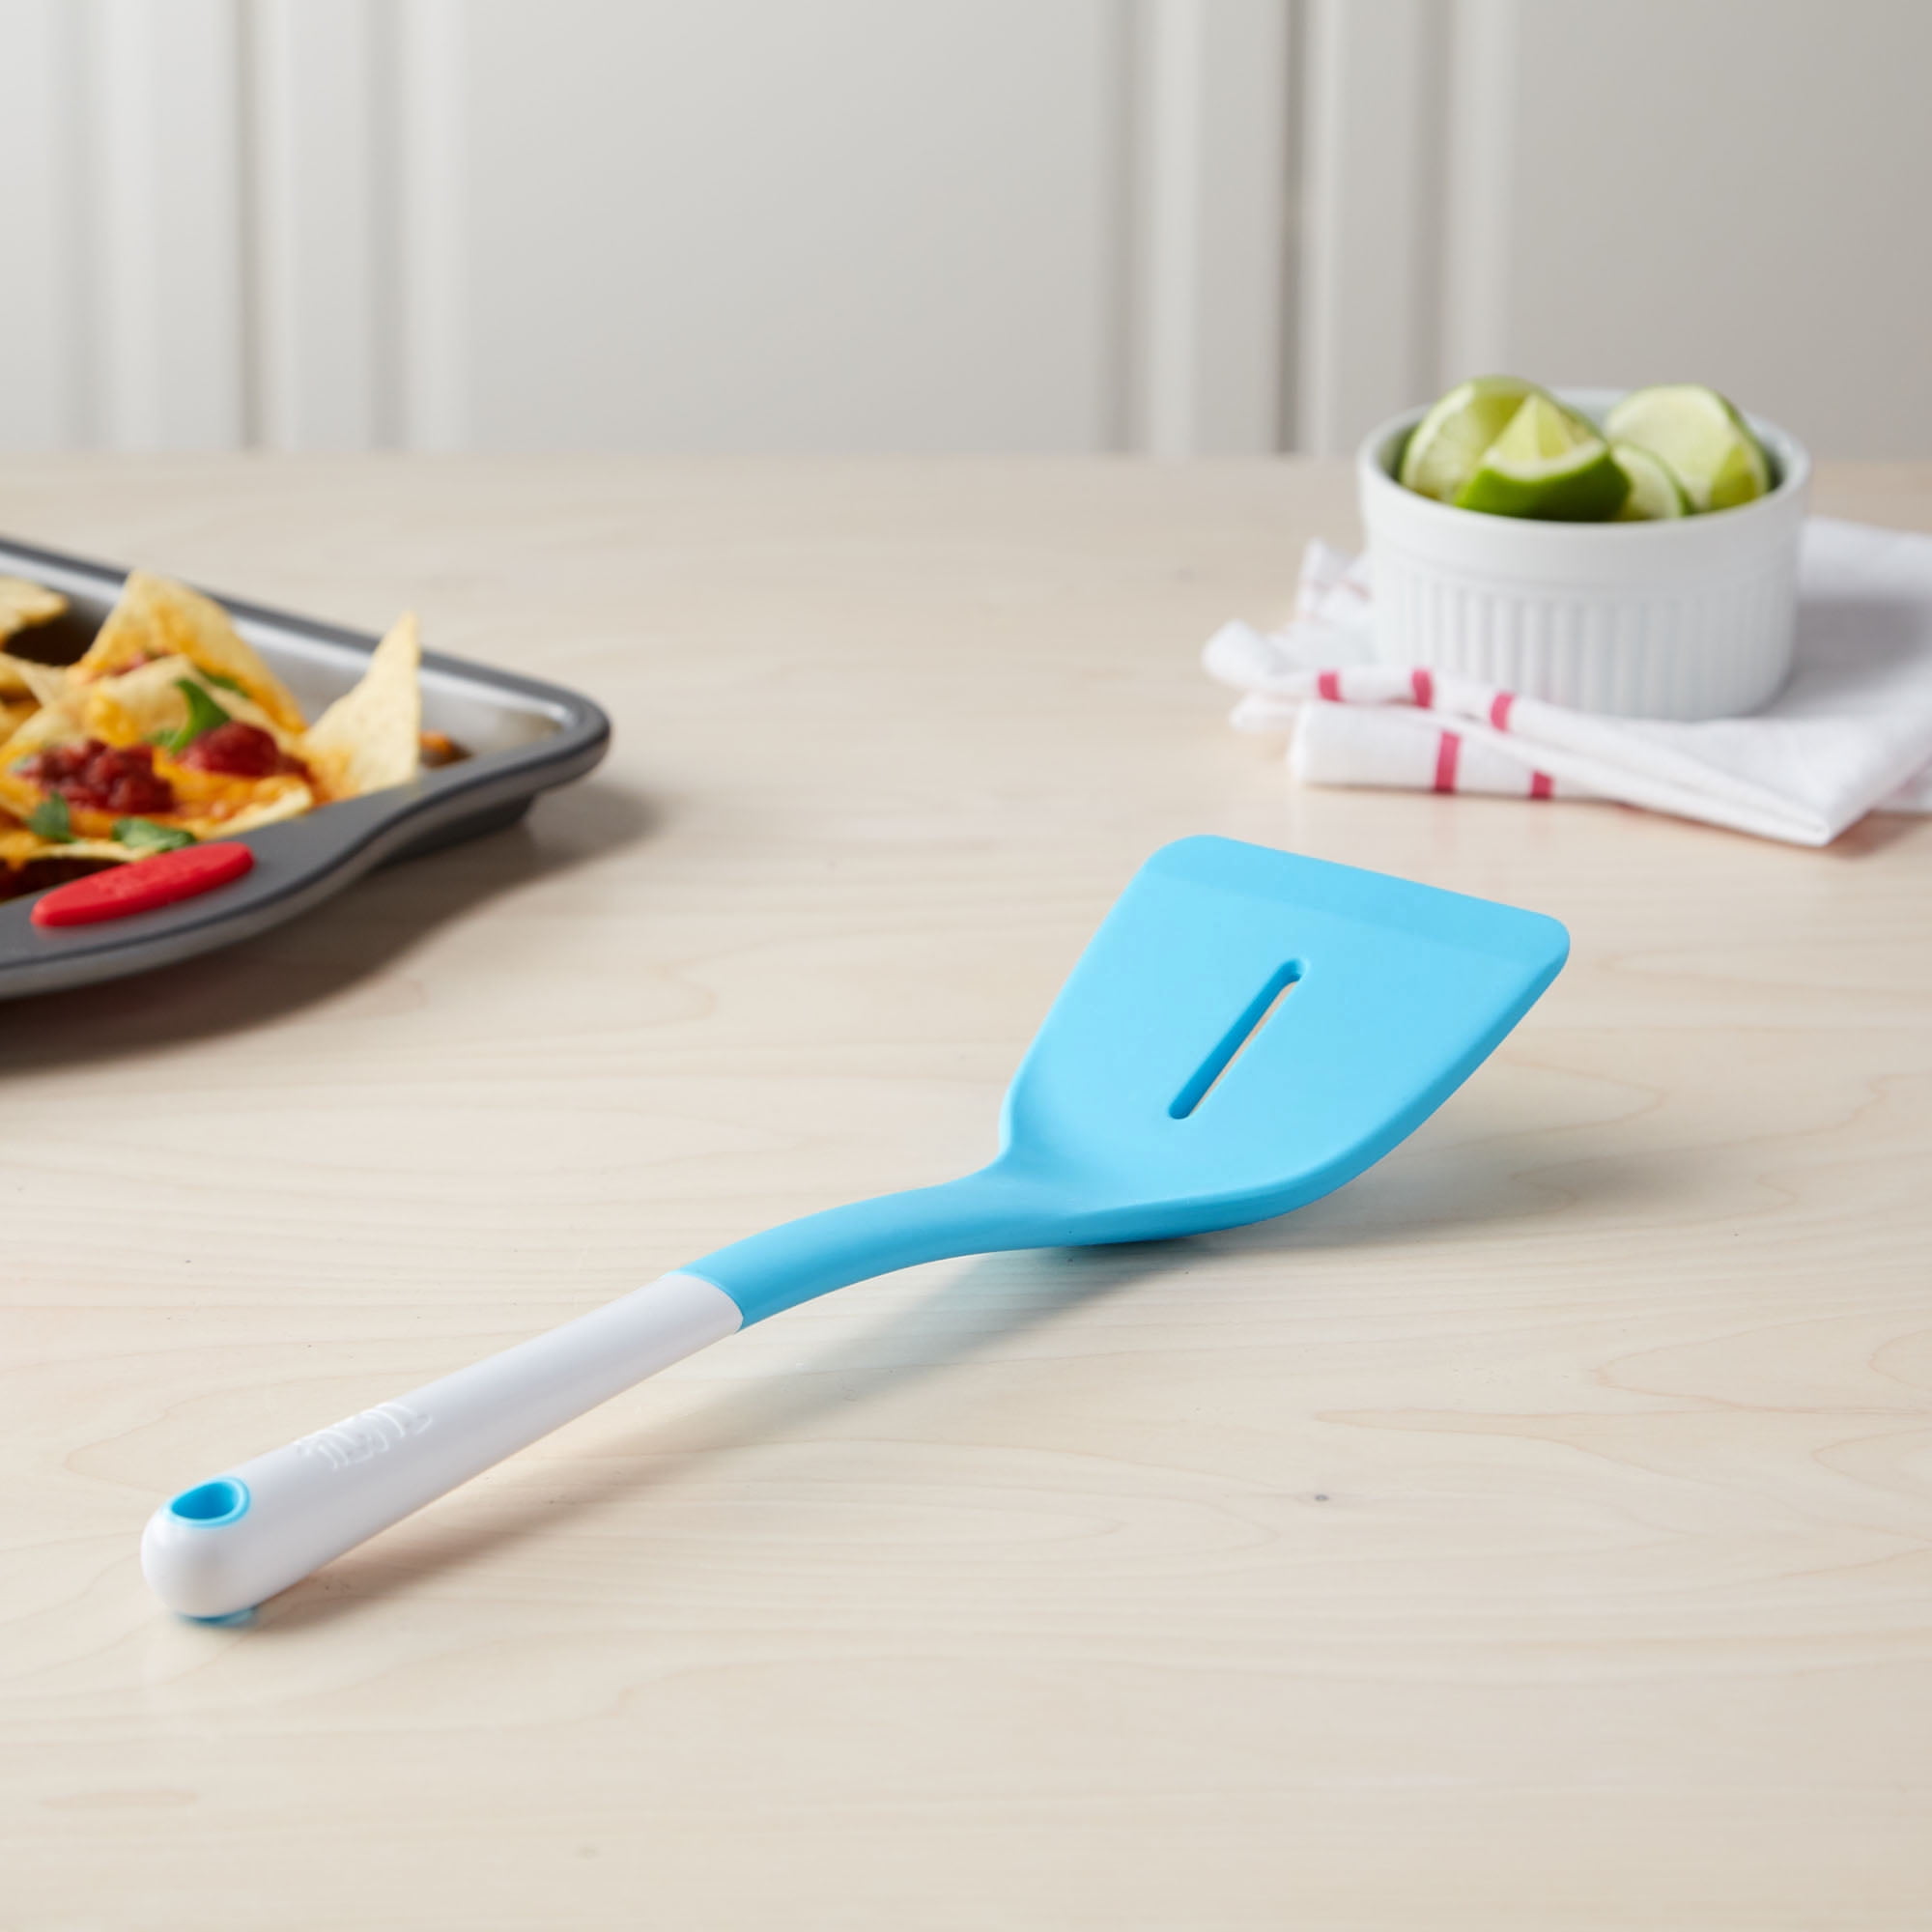 Tasty Silicone Heat Resistant Blue Slotted Turner